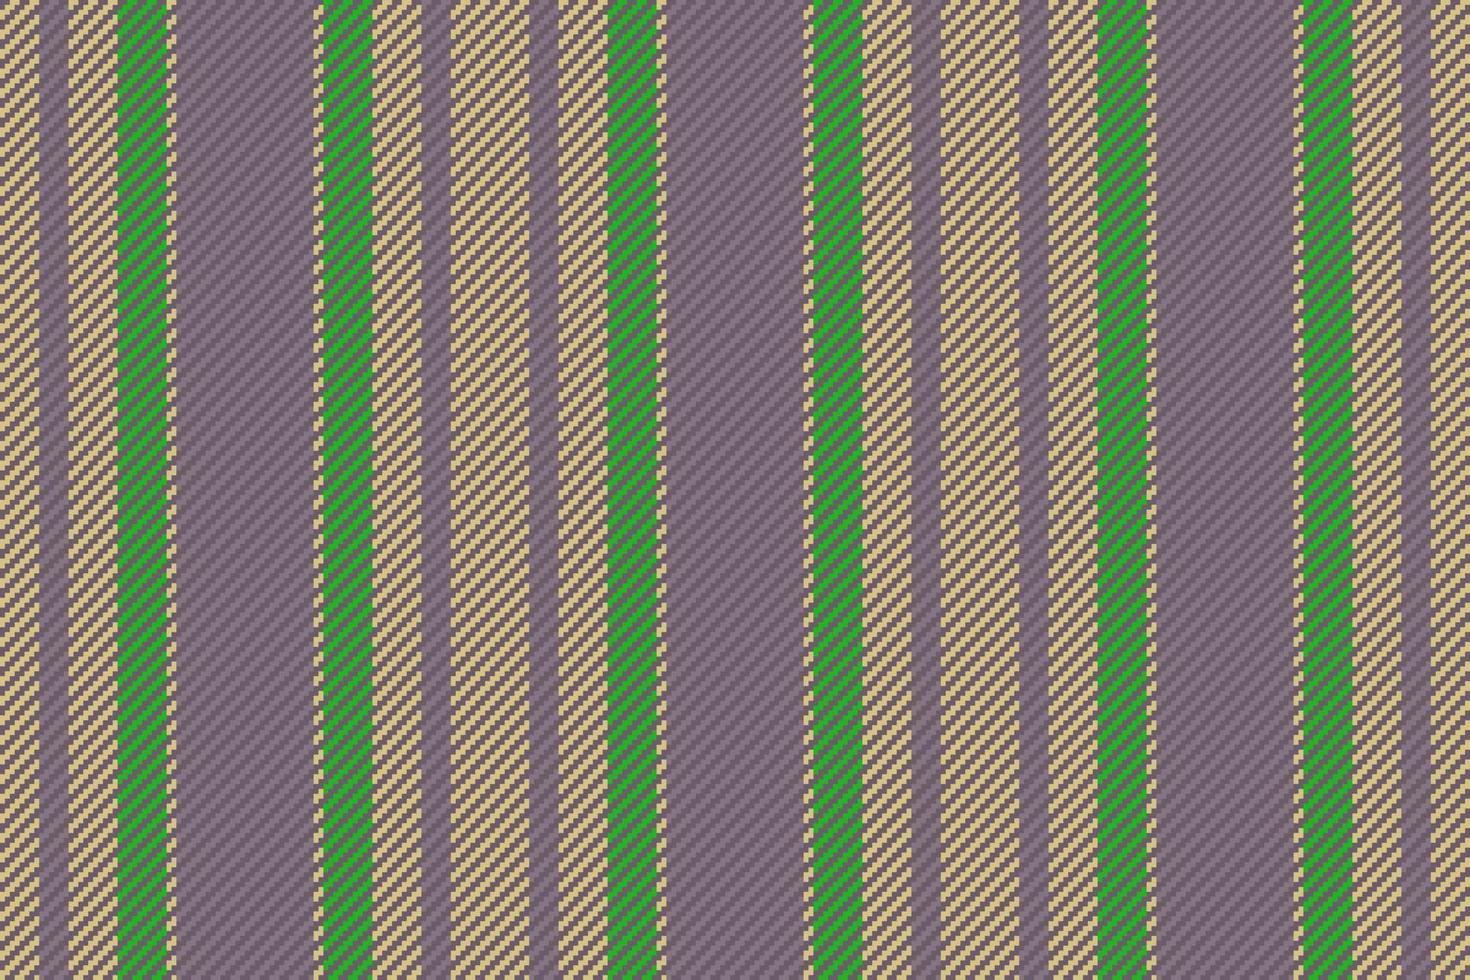 Lines background texture. Stripe vertical textile. Seamless vector fabric pattern.